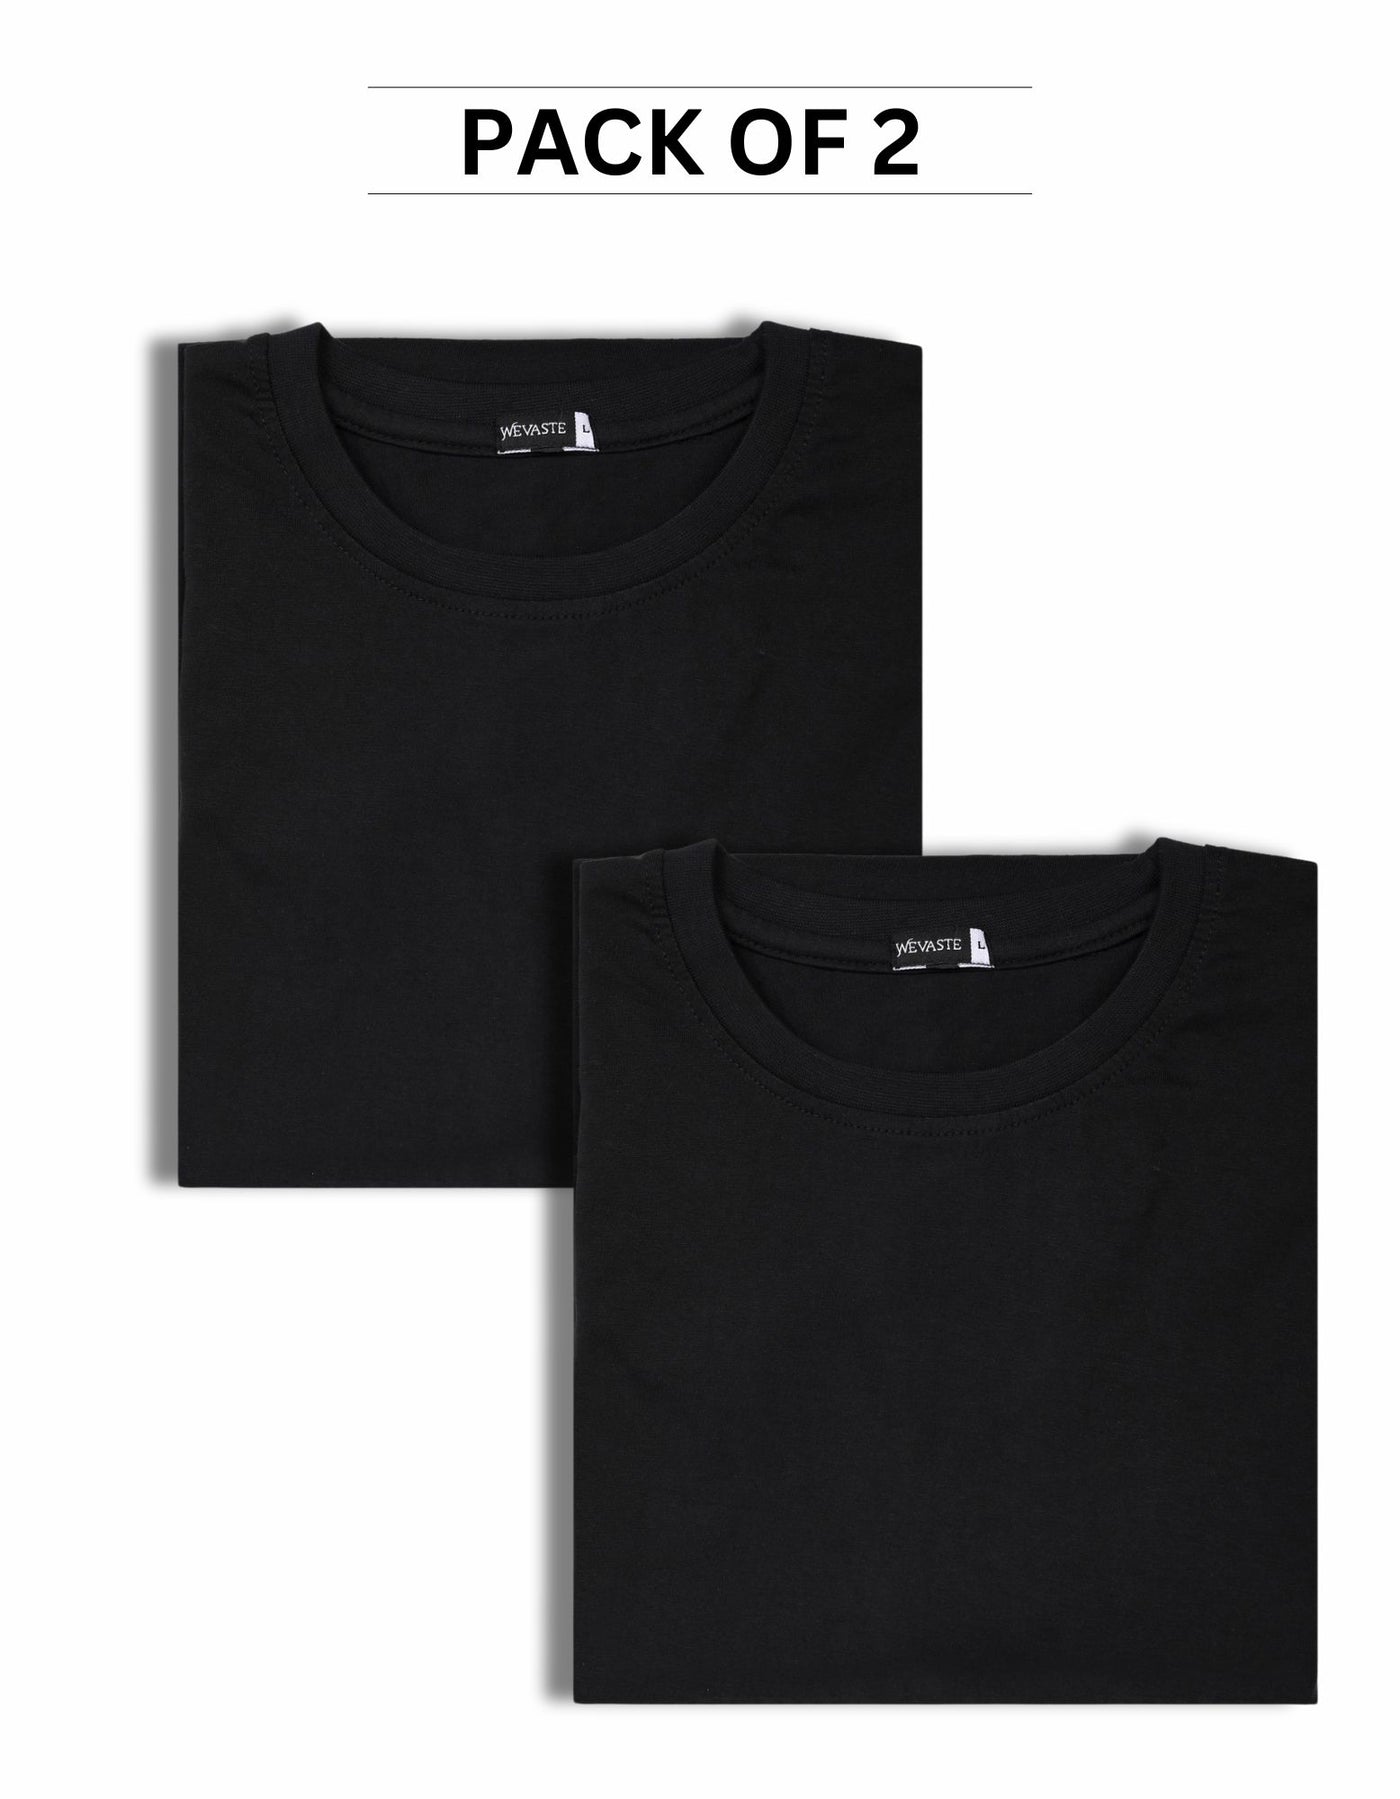 Black Oversized Pack Of 2 T-shirts